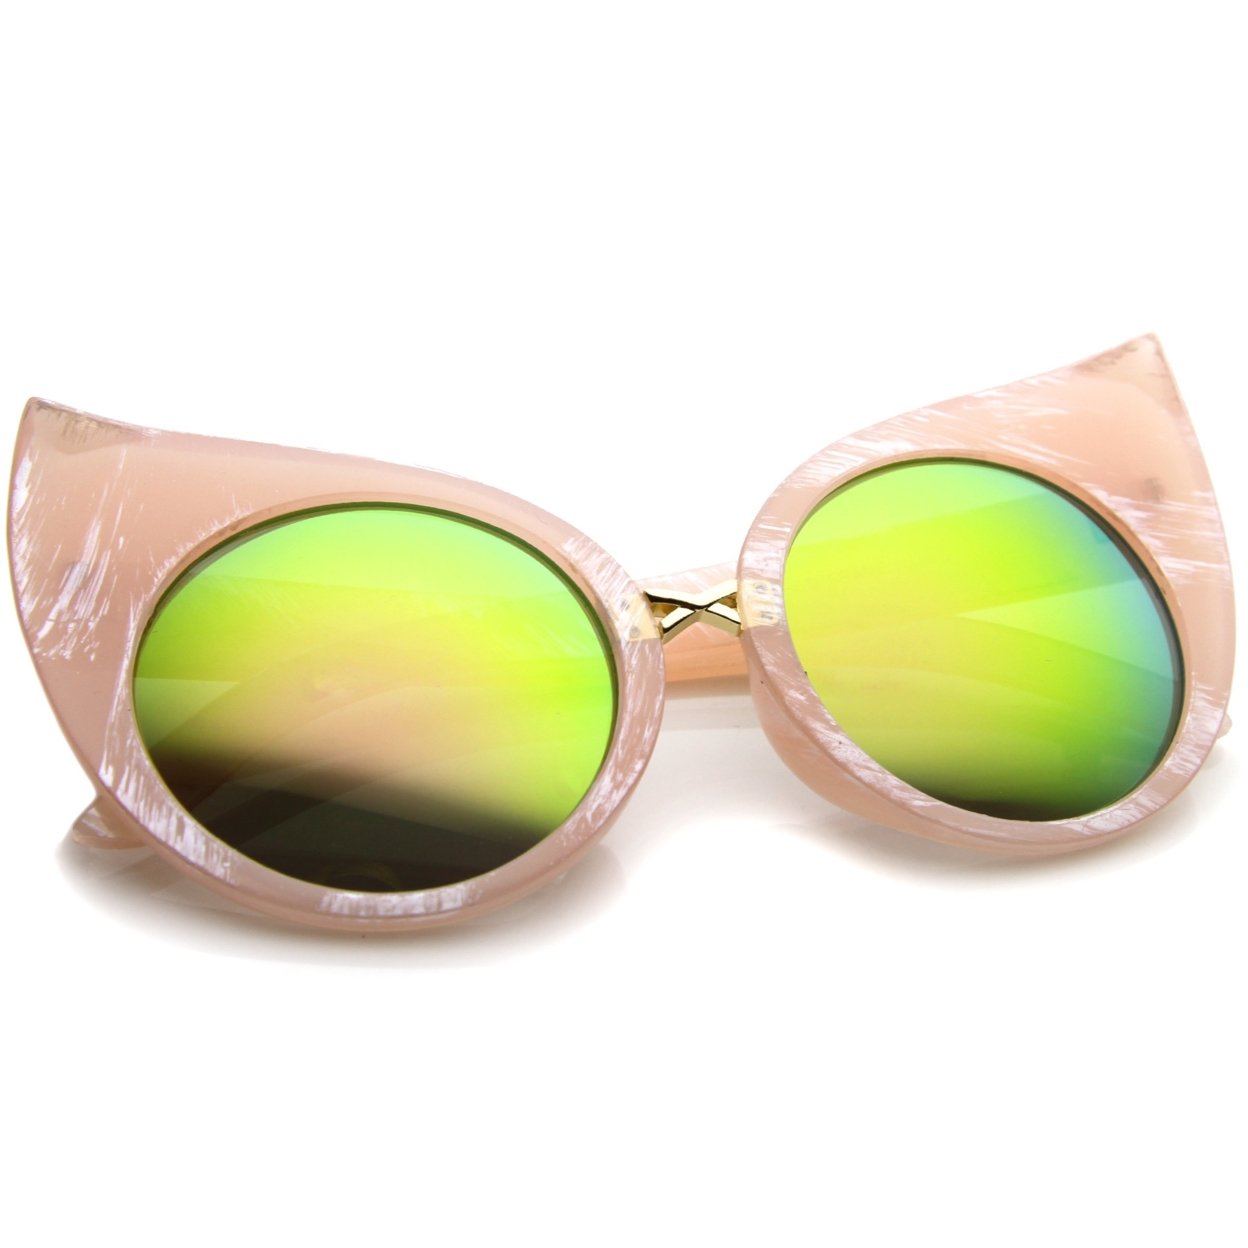 Womens Fashion Bold Marble Frame Mirrored Lens Round Cat Eye Sunglasses 51 mm - image 4 of 6